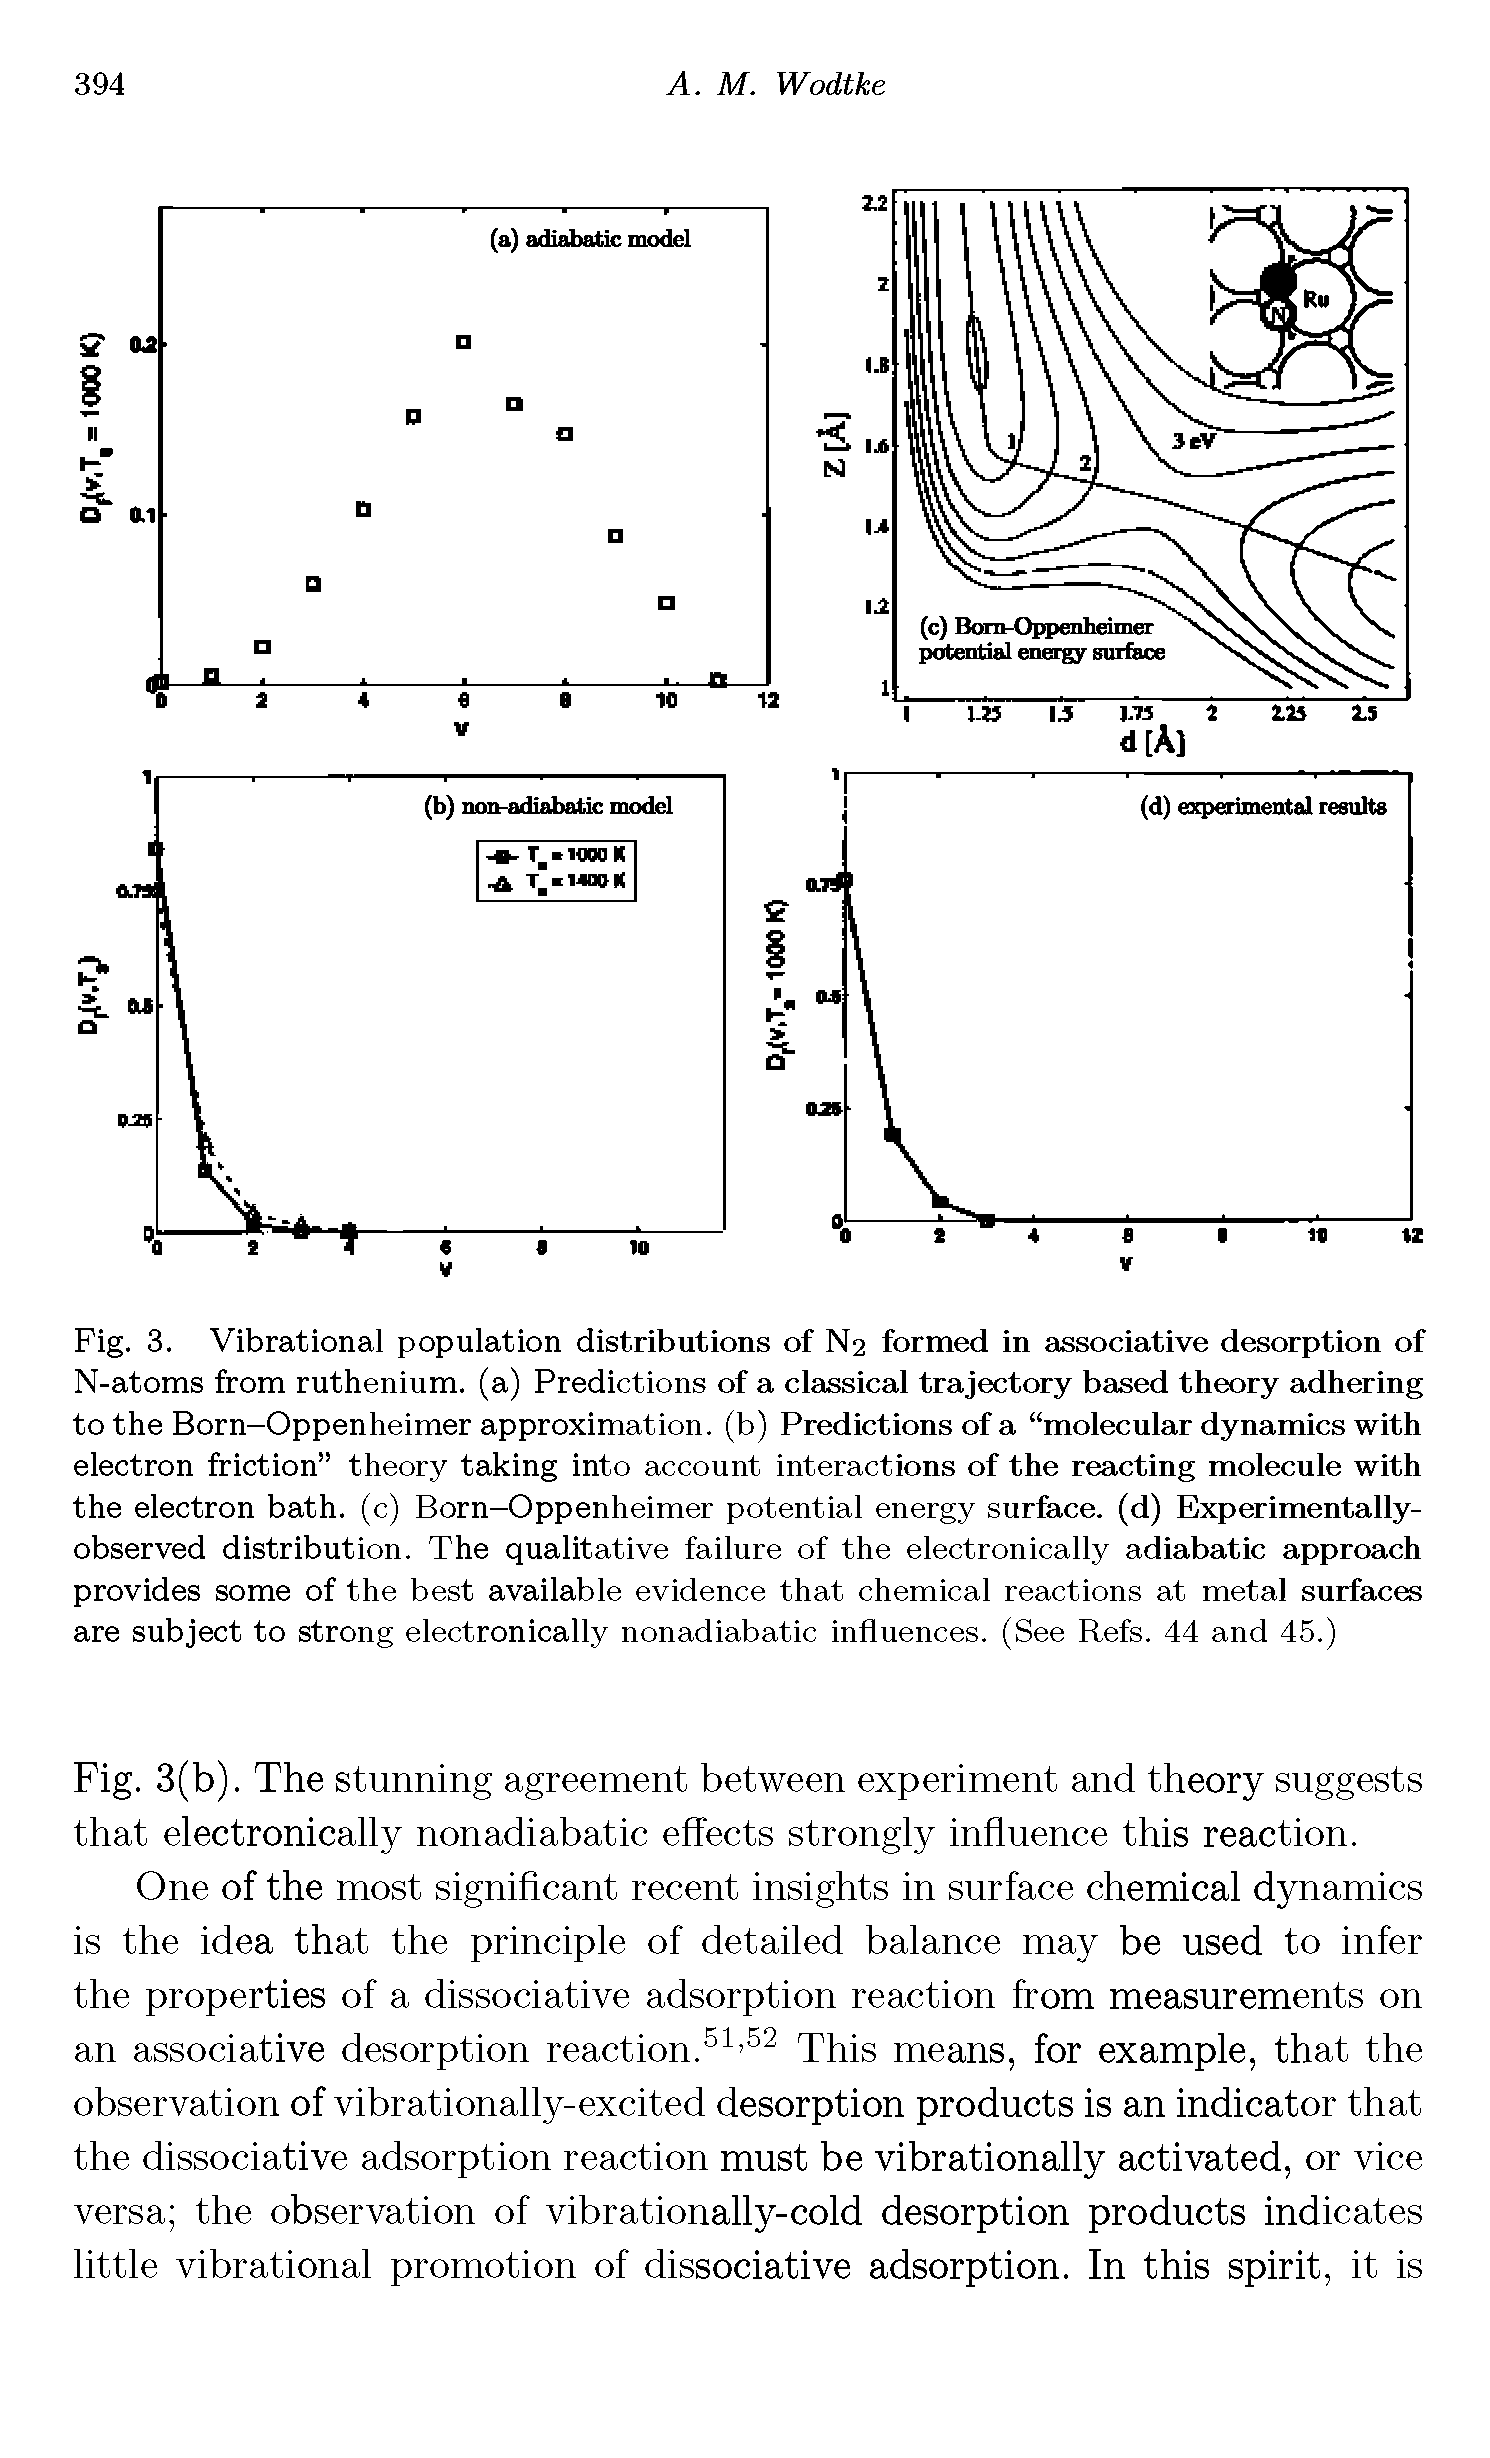 Fig. 3. Vibrational population distributions of N2 formed in associative desorption of N-atoms from ruthenium, (a) Predictions of a classical trajectory based theory adhering to the Born-Oppenheimer approximation, (b) Predictions of a molecular dynamics with electron friction theory taking into account interactions of the reacting molecule with the electron bath, (c) Born—Oppenheimer potential energy surface, (d) Experimentally-observed distribution. The qualitative failure of the electronically adiabatic approach provides some of the best available evidence that chemical reactions at metal surfaces are subject to strong electronically nonadiabatic influences. (See Refs. 44 and 45.)...